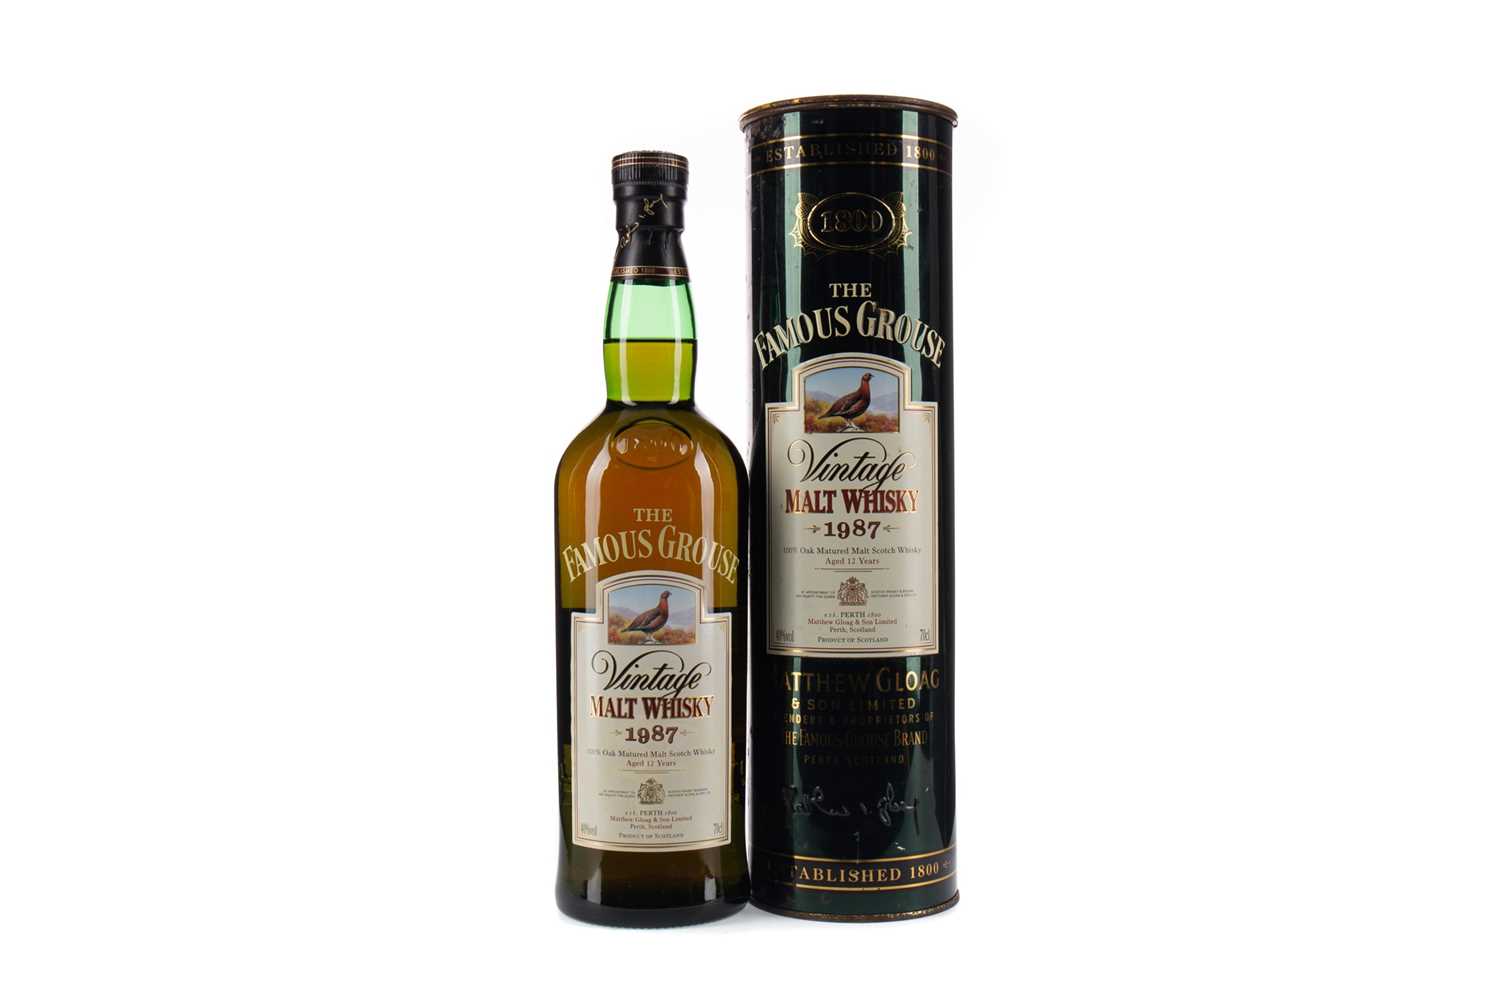 Lot 189 - FAMOUS GROUSE 1987 AGED 12 YEARS